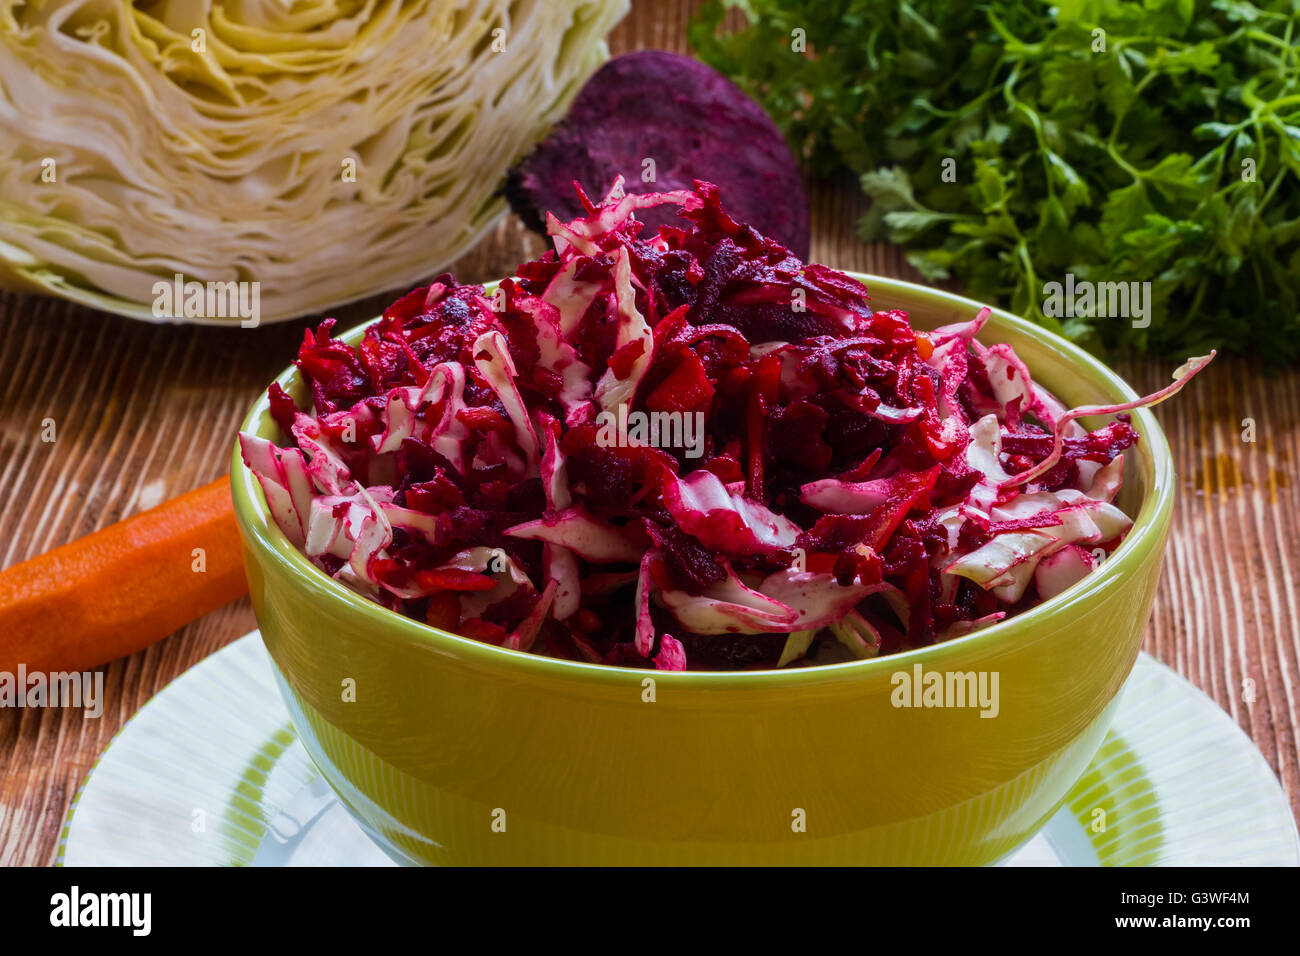 Diet salad with beetroot, carrot, cabbage, olive oil and lemon. Served in a bowl on wooden background. Stock Photo